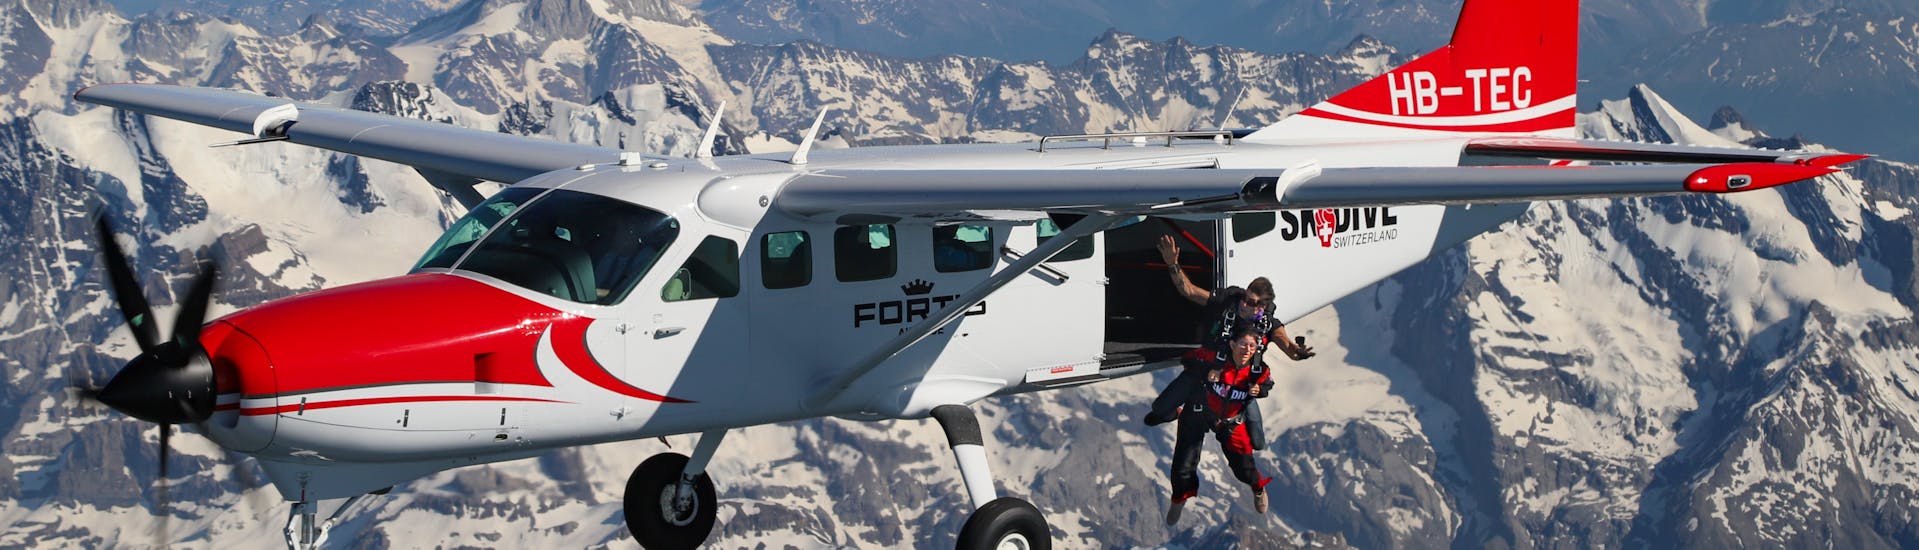 The plane that we will use during the Tandem Skydive in Interlaken, Switzerland (4000m) with Skydive Switzerland.